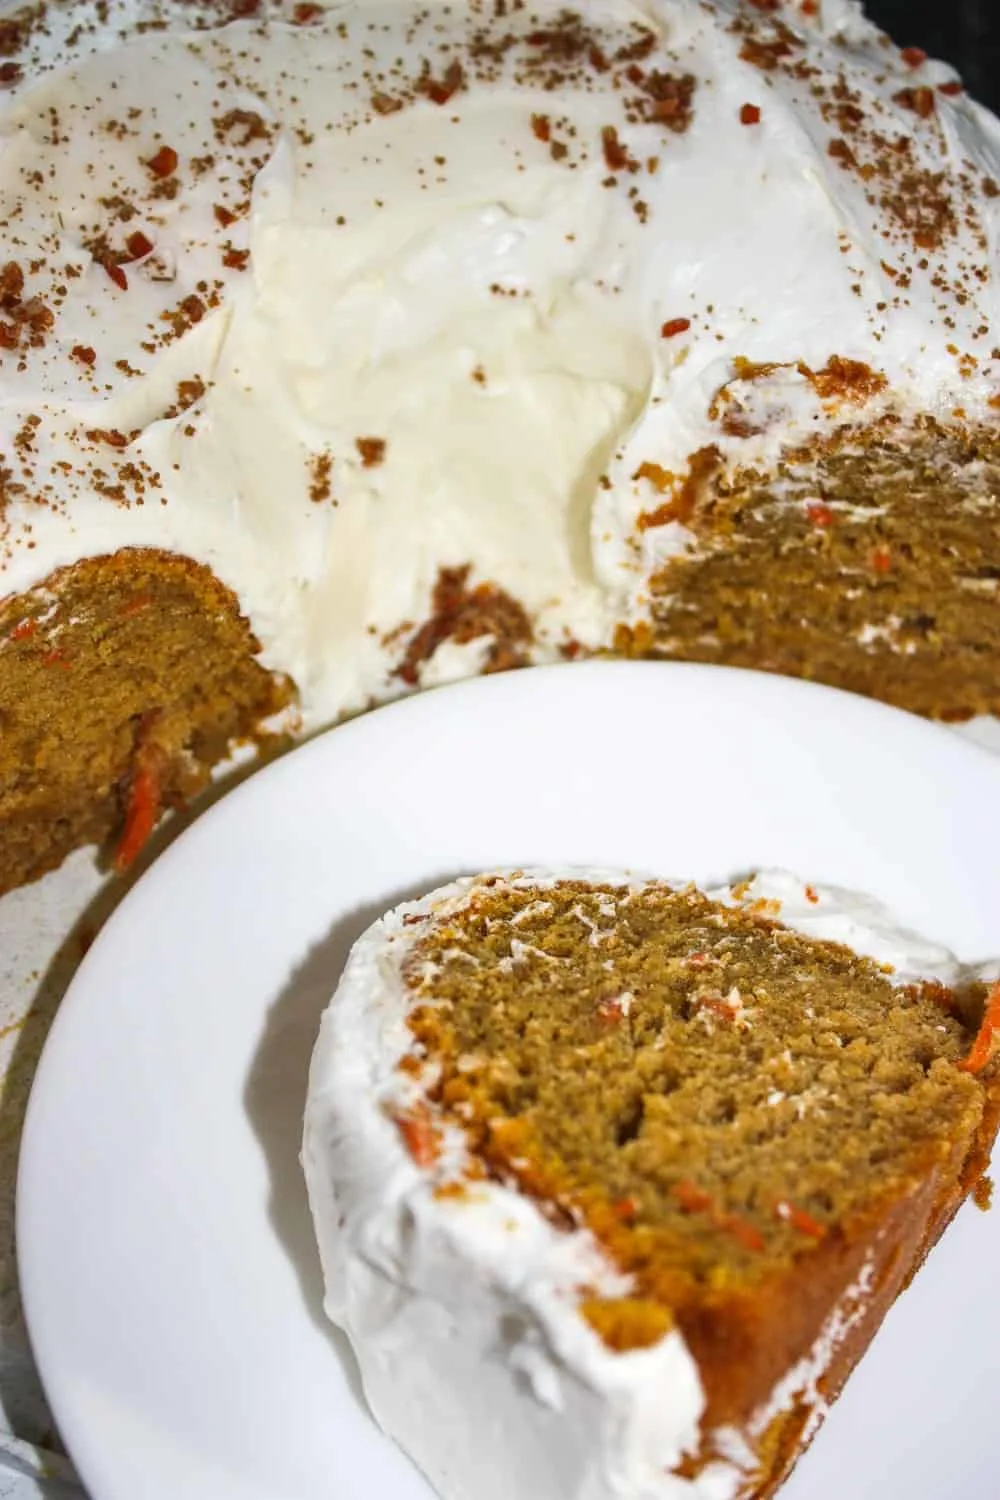 The flavours of fall suit both pumpkin cake and carrot cake so I decided to combine them and the result was this delicious gluten free Pumpkin Carrot Cake!